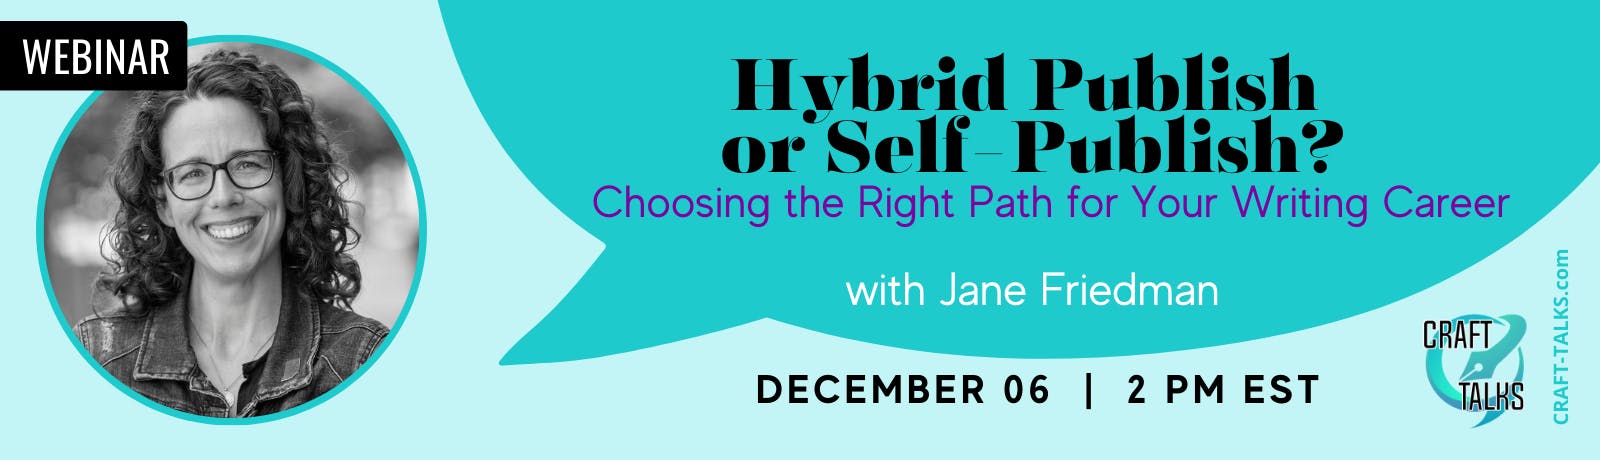 Hybrid Publish or Self-Publish? : Choosing the Right Path for Your Writing Career with Jane Friedman. $25 webinar hosted by Craft Talks. Wednesday, December 6, 2023. 2 p.m. to 3:15 p.m. Eastern.